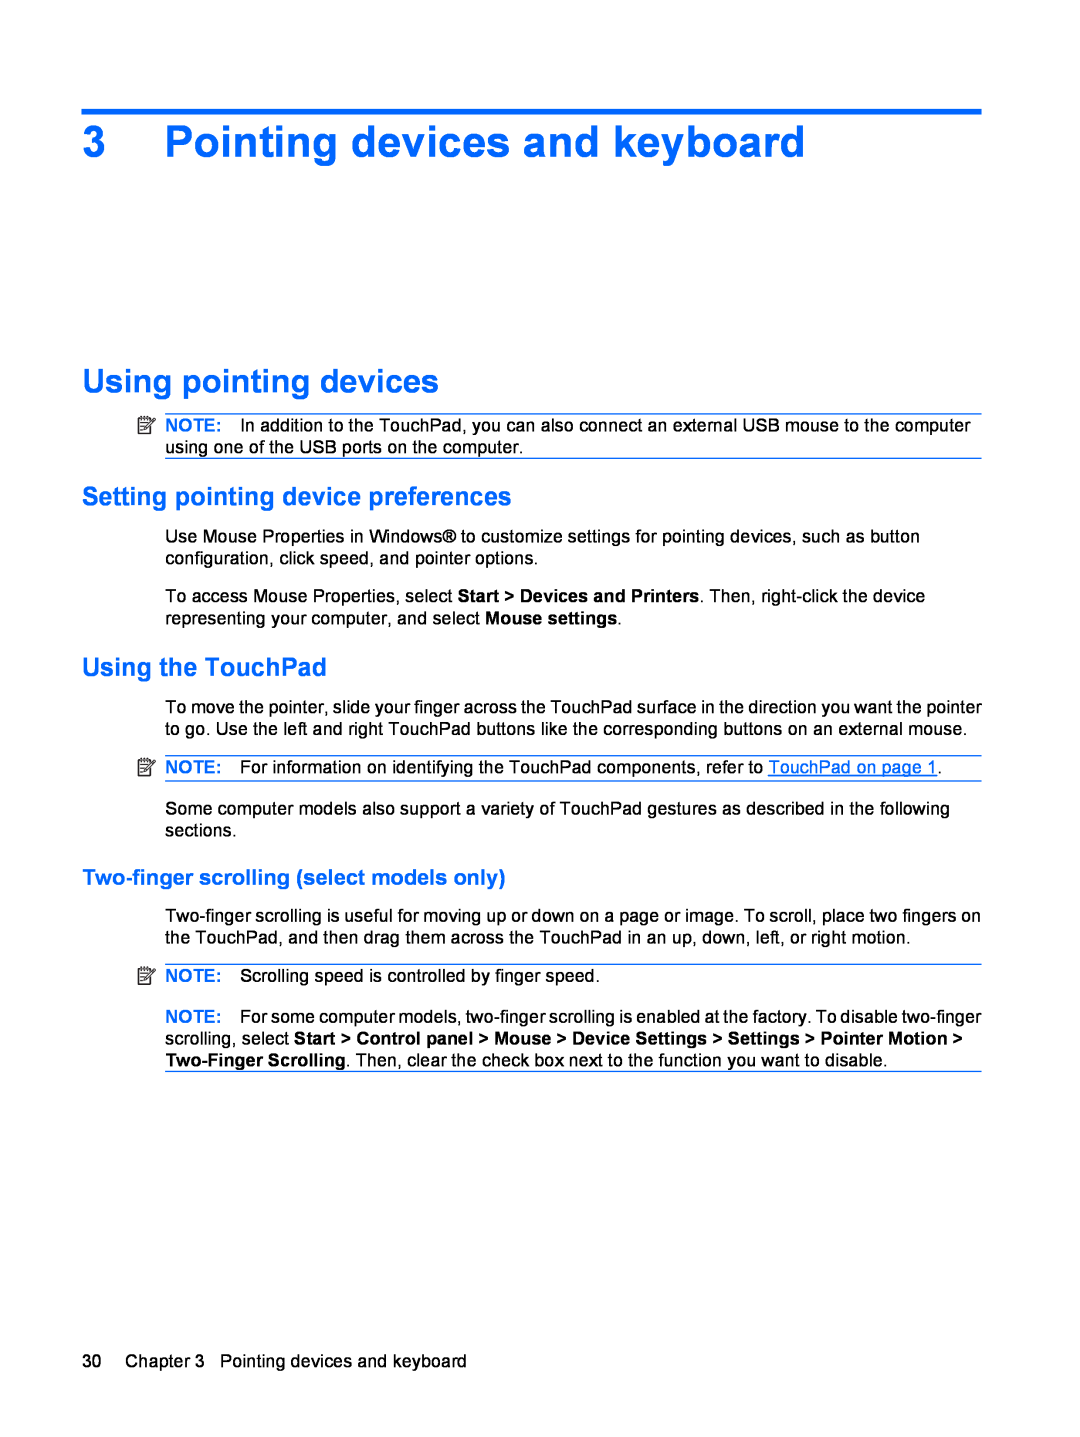 HP CQ35-332TX, CQ35-304TU manual Pointing devices and keyboard, Using pointing devices, Setting pointing device preferences 